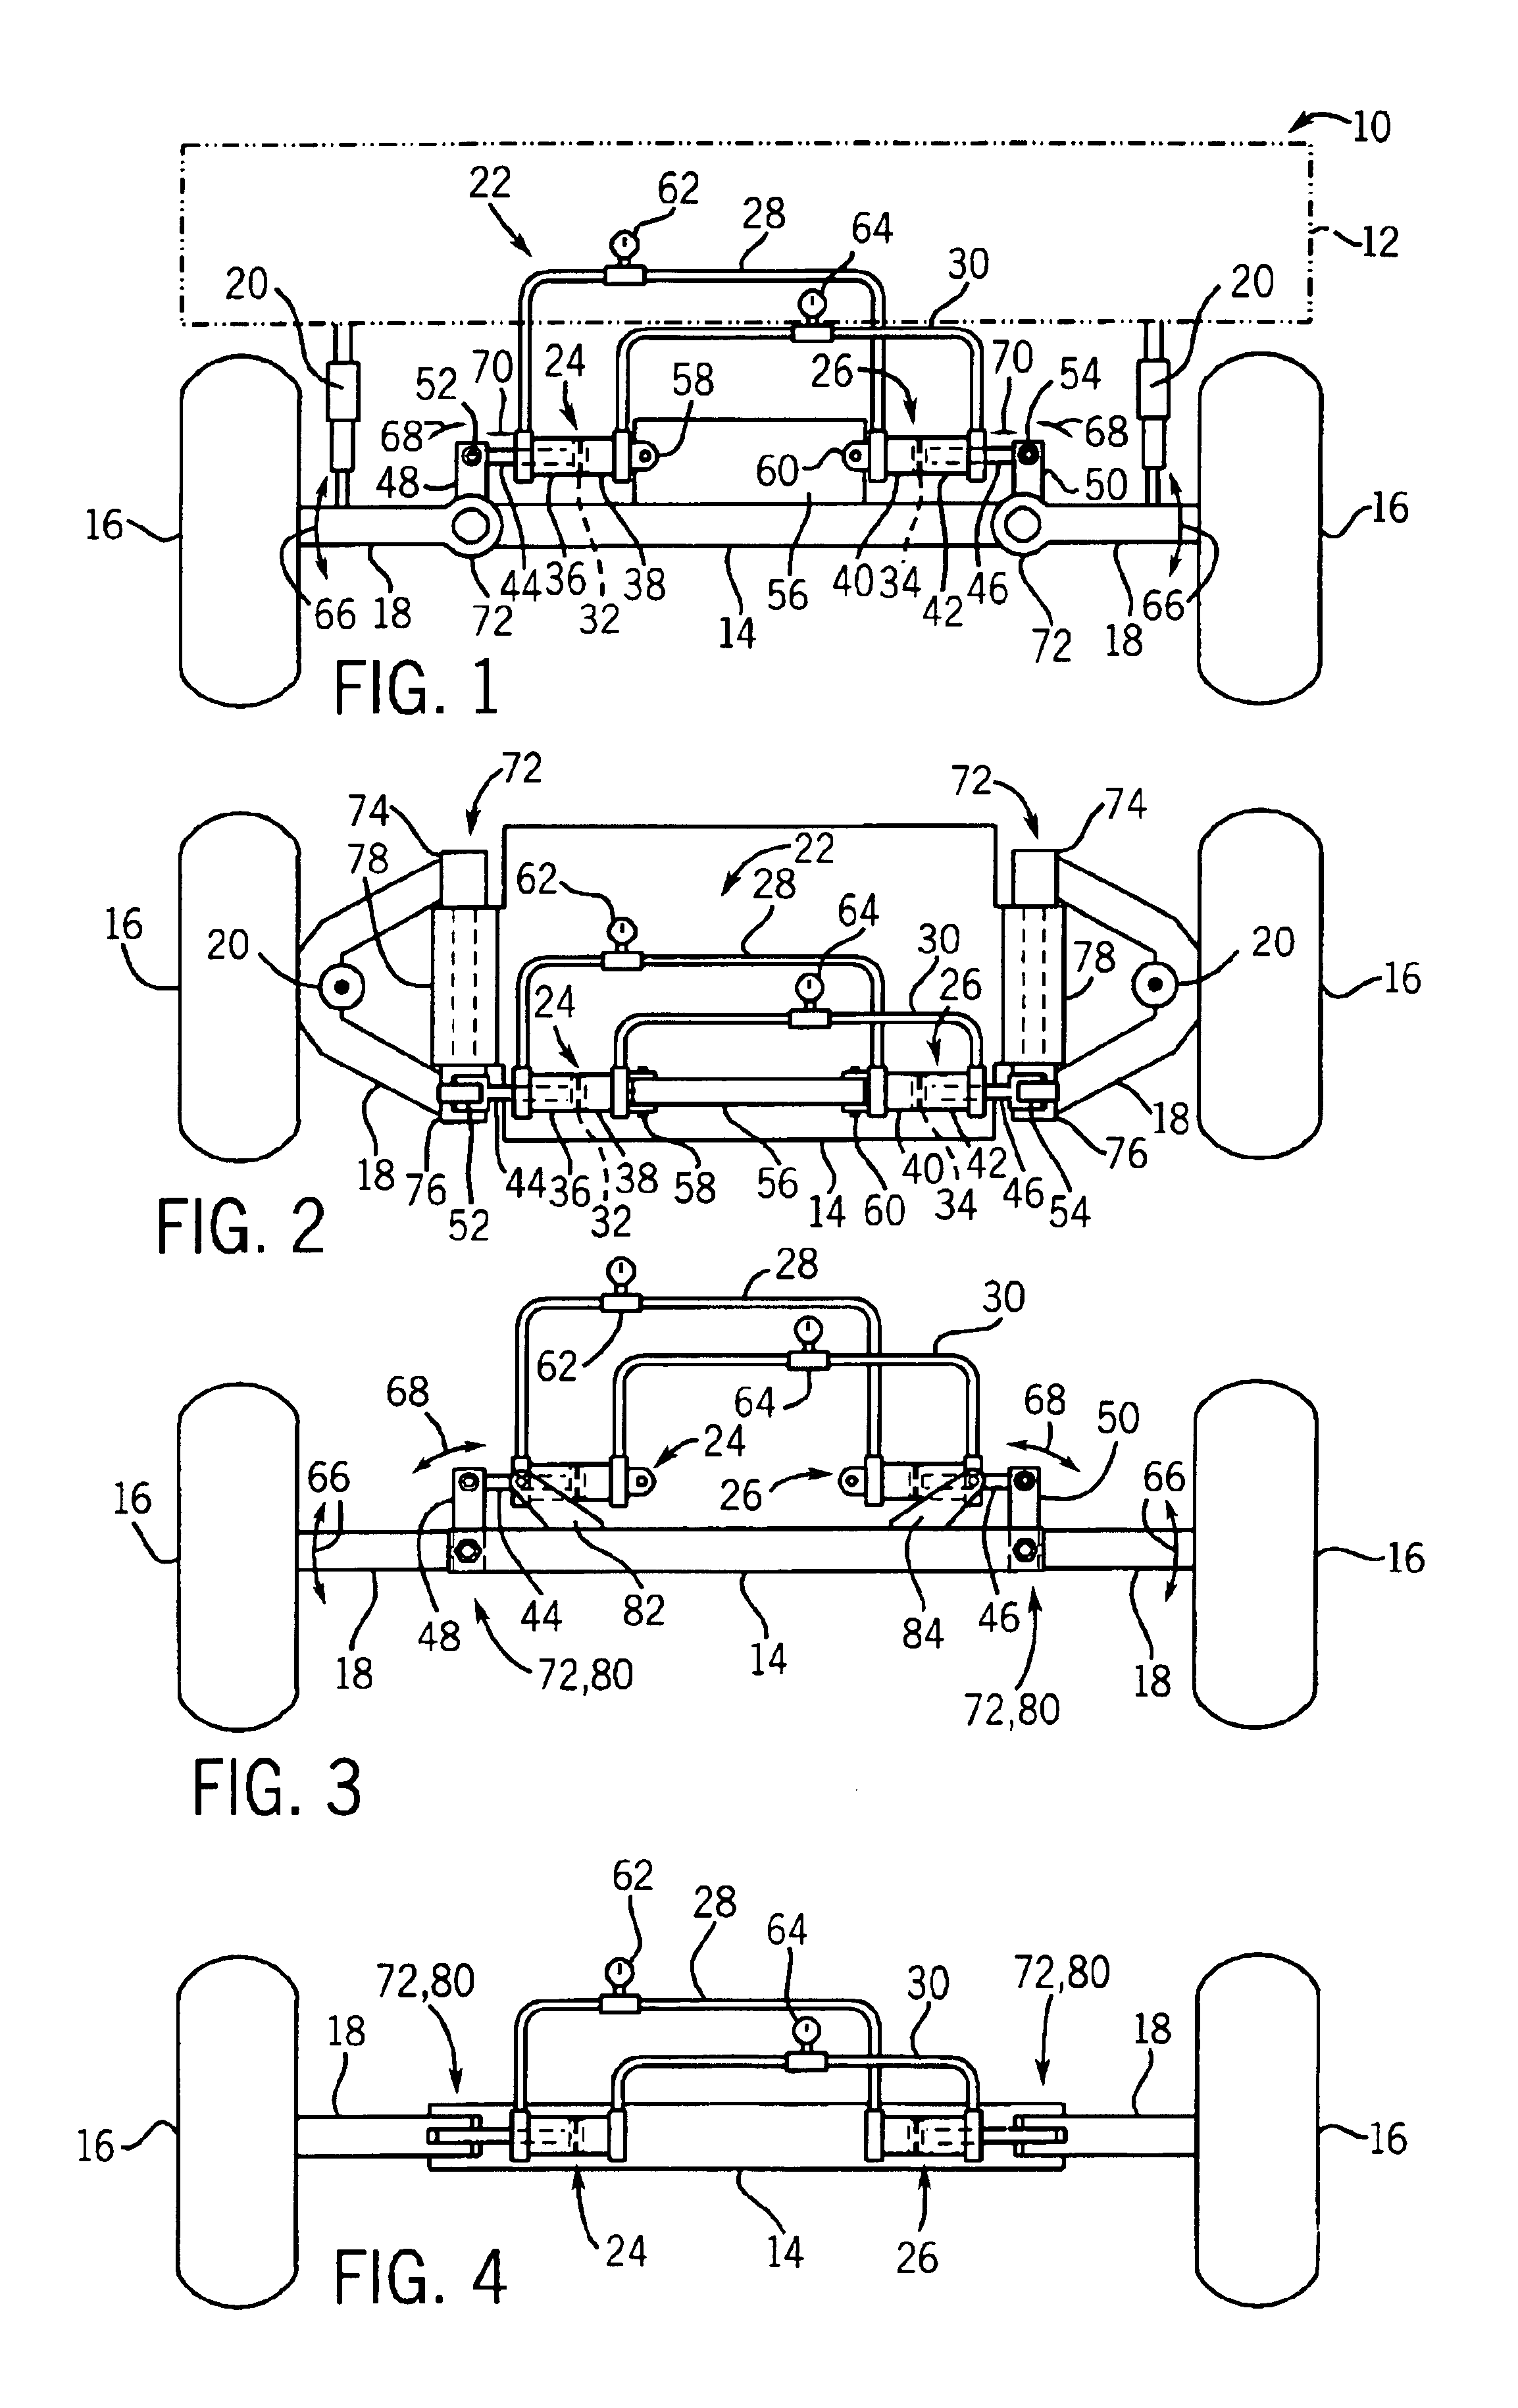 Hydraulically compensated stabilizer system